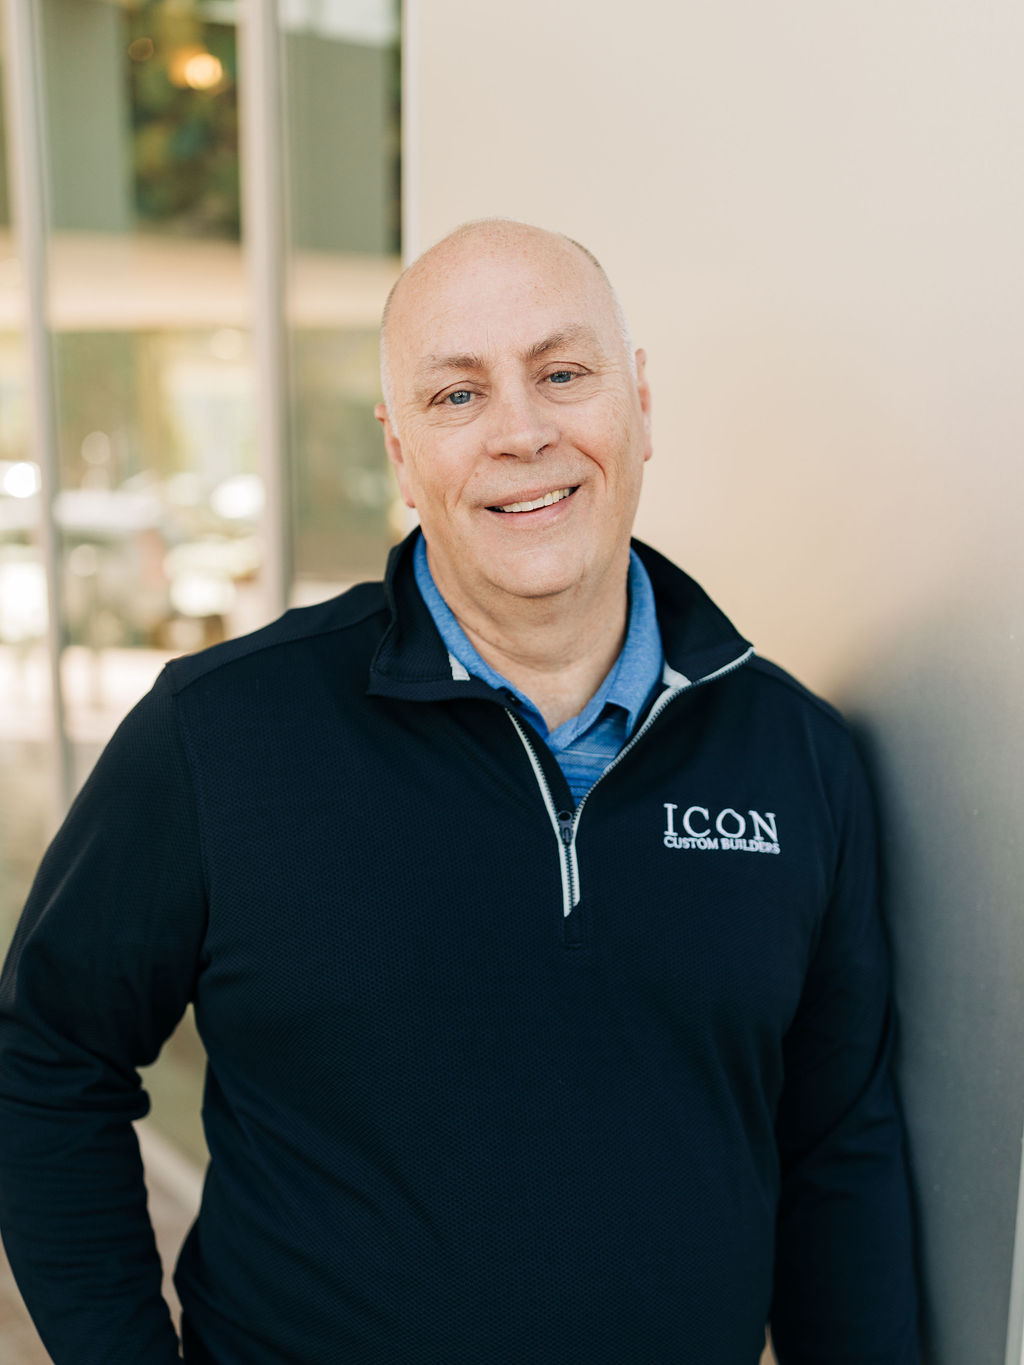 Jim Matthieu, ICON Project Manager